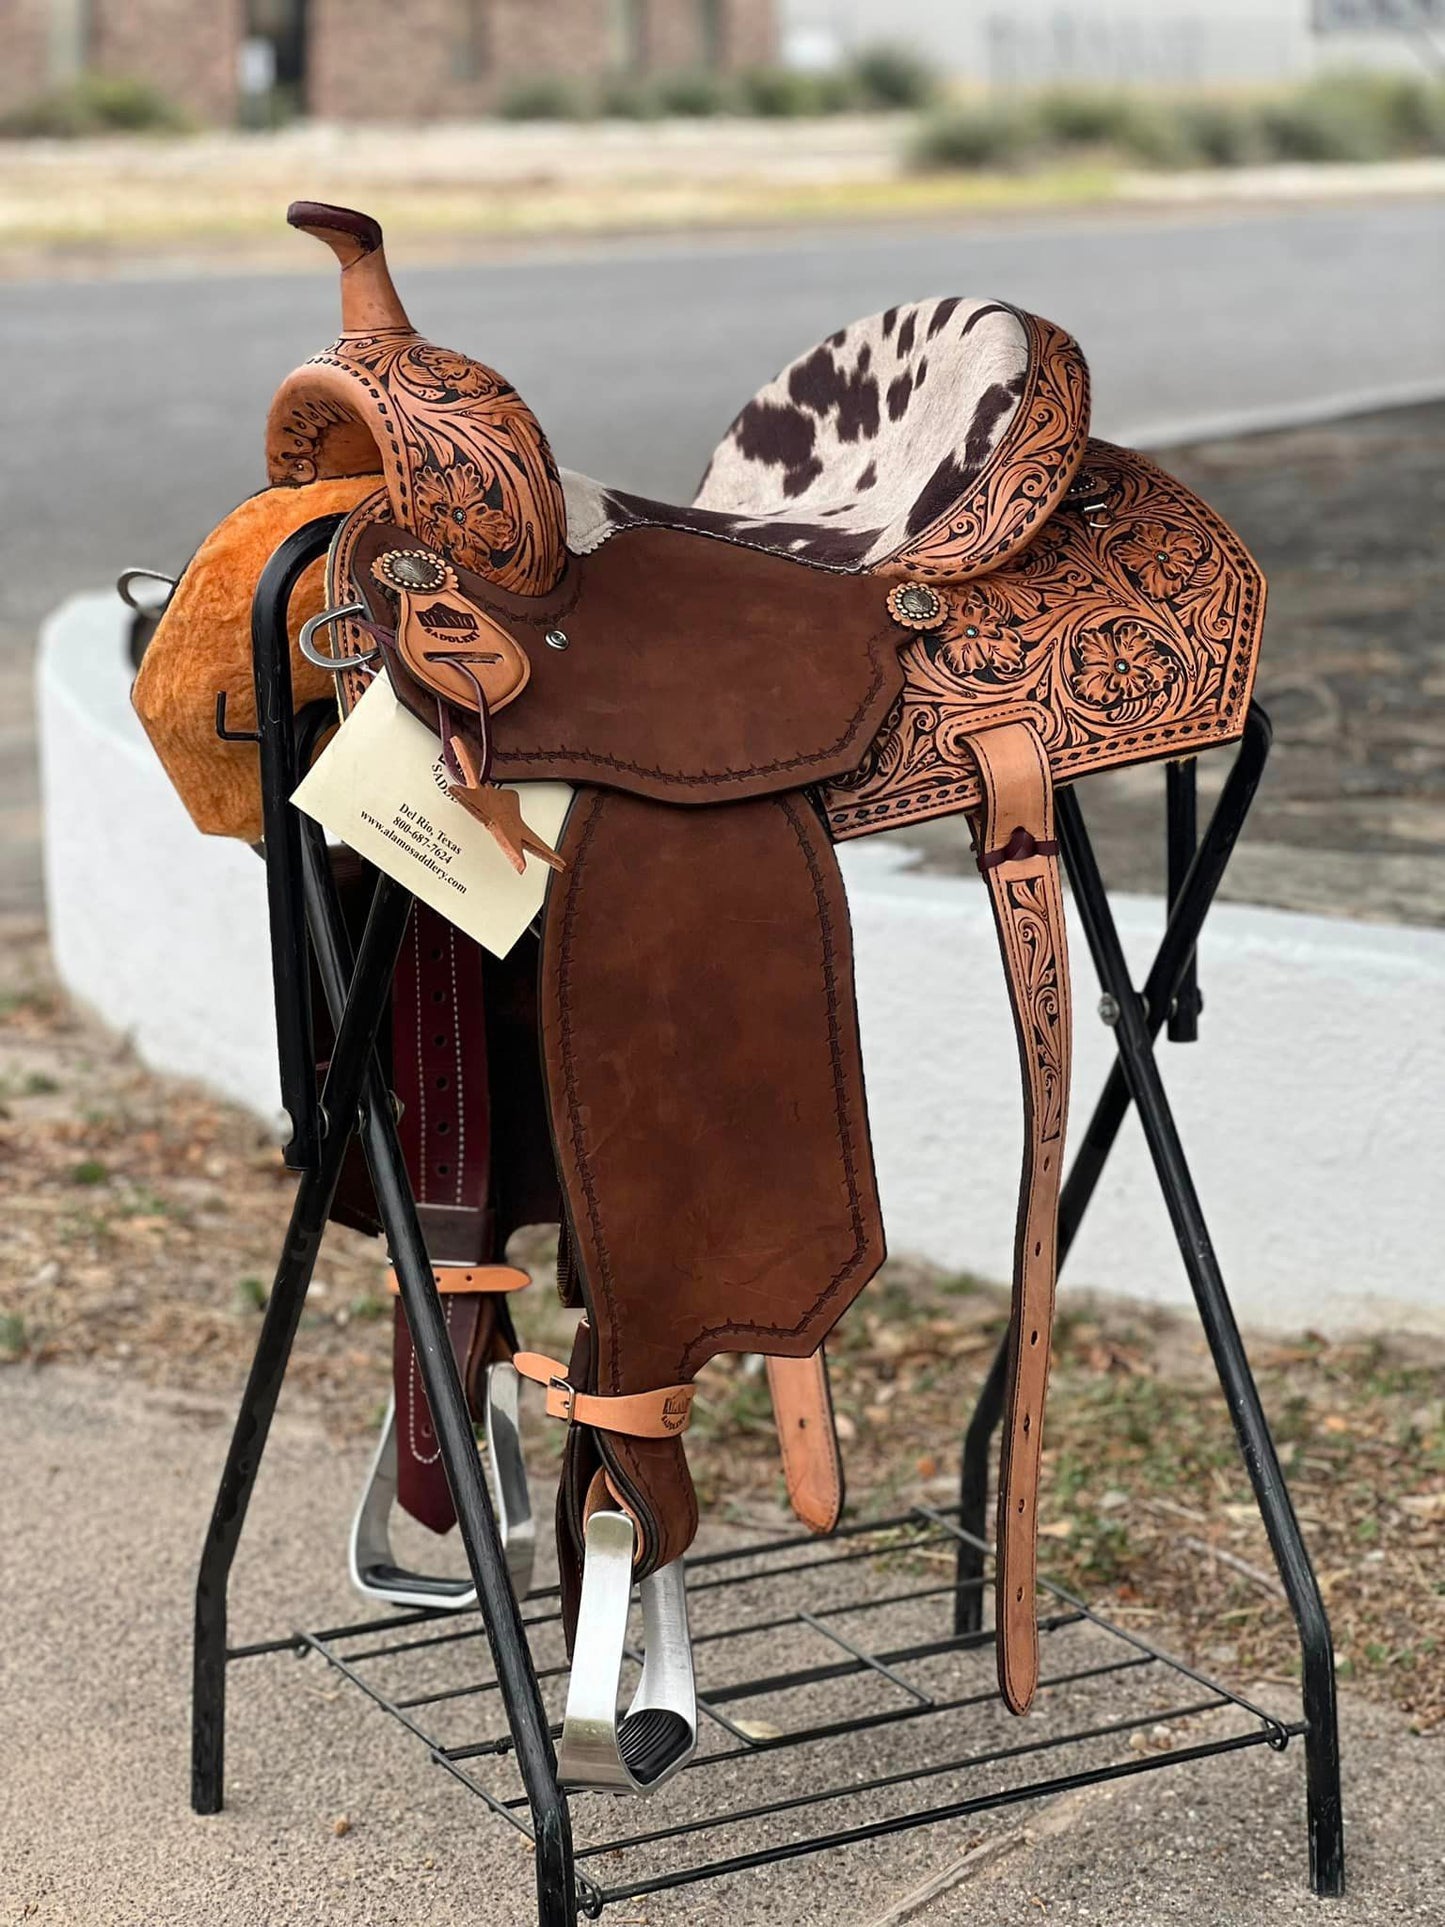 14" El pinto (Two-toned leather w/ Cheyanne roll) Barrel Saddle